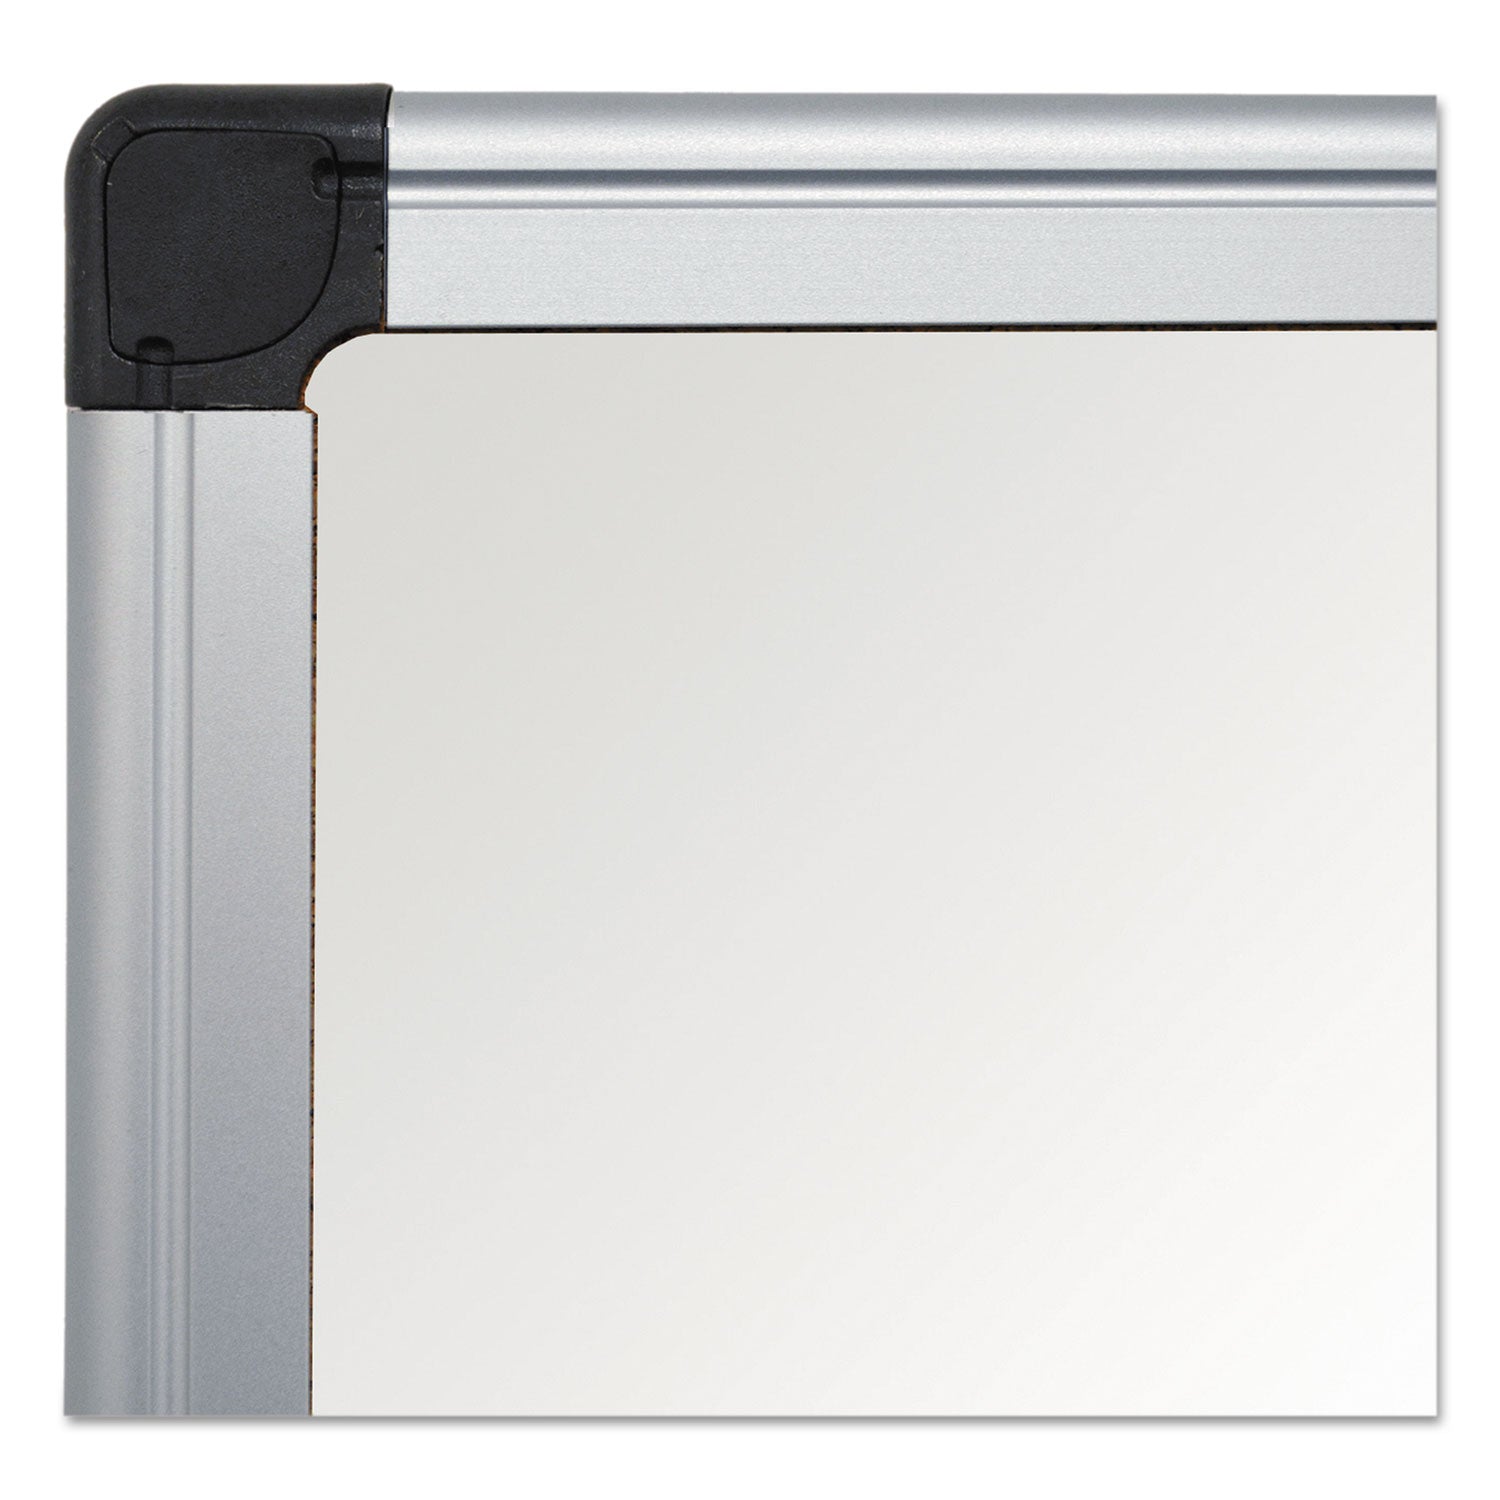 Value Lacquered Steel Magnetic Dry Erase Board, 72 x 48, White Surface, Silver Aluminum Frame - 